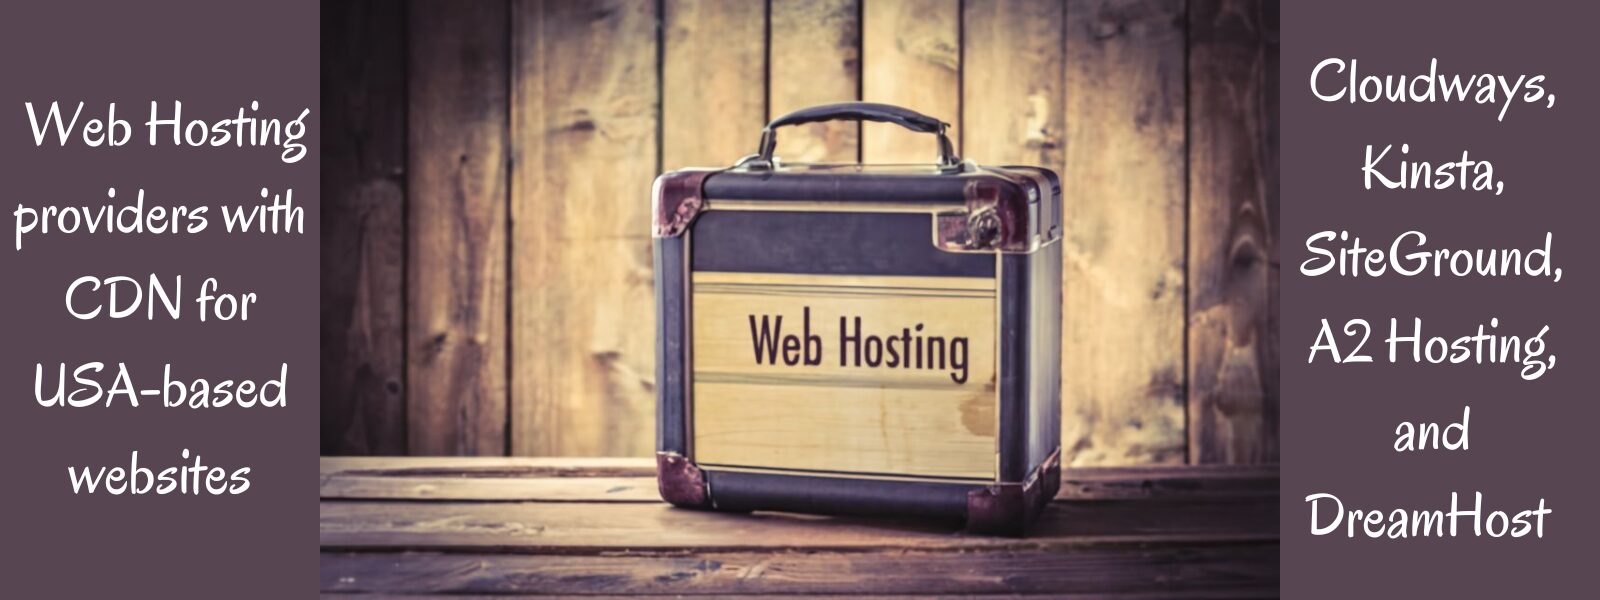 hosting USA-based websites with a Content Delivery Network